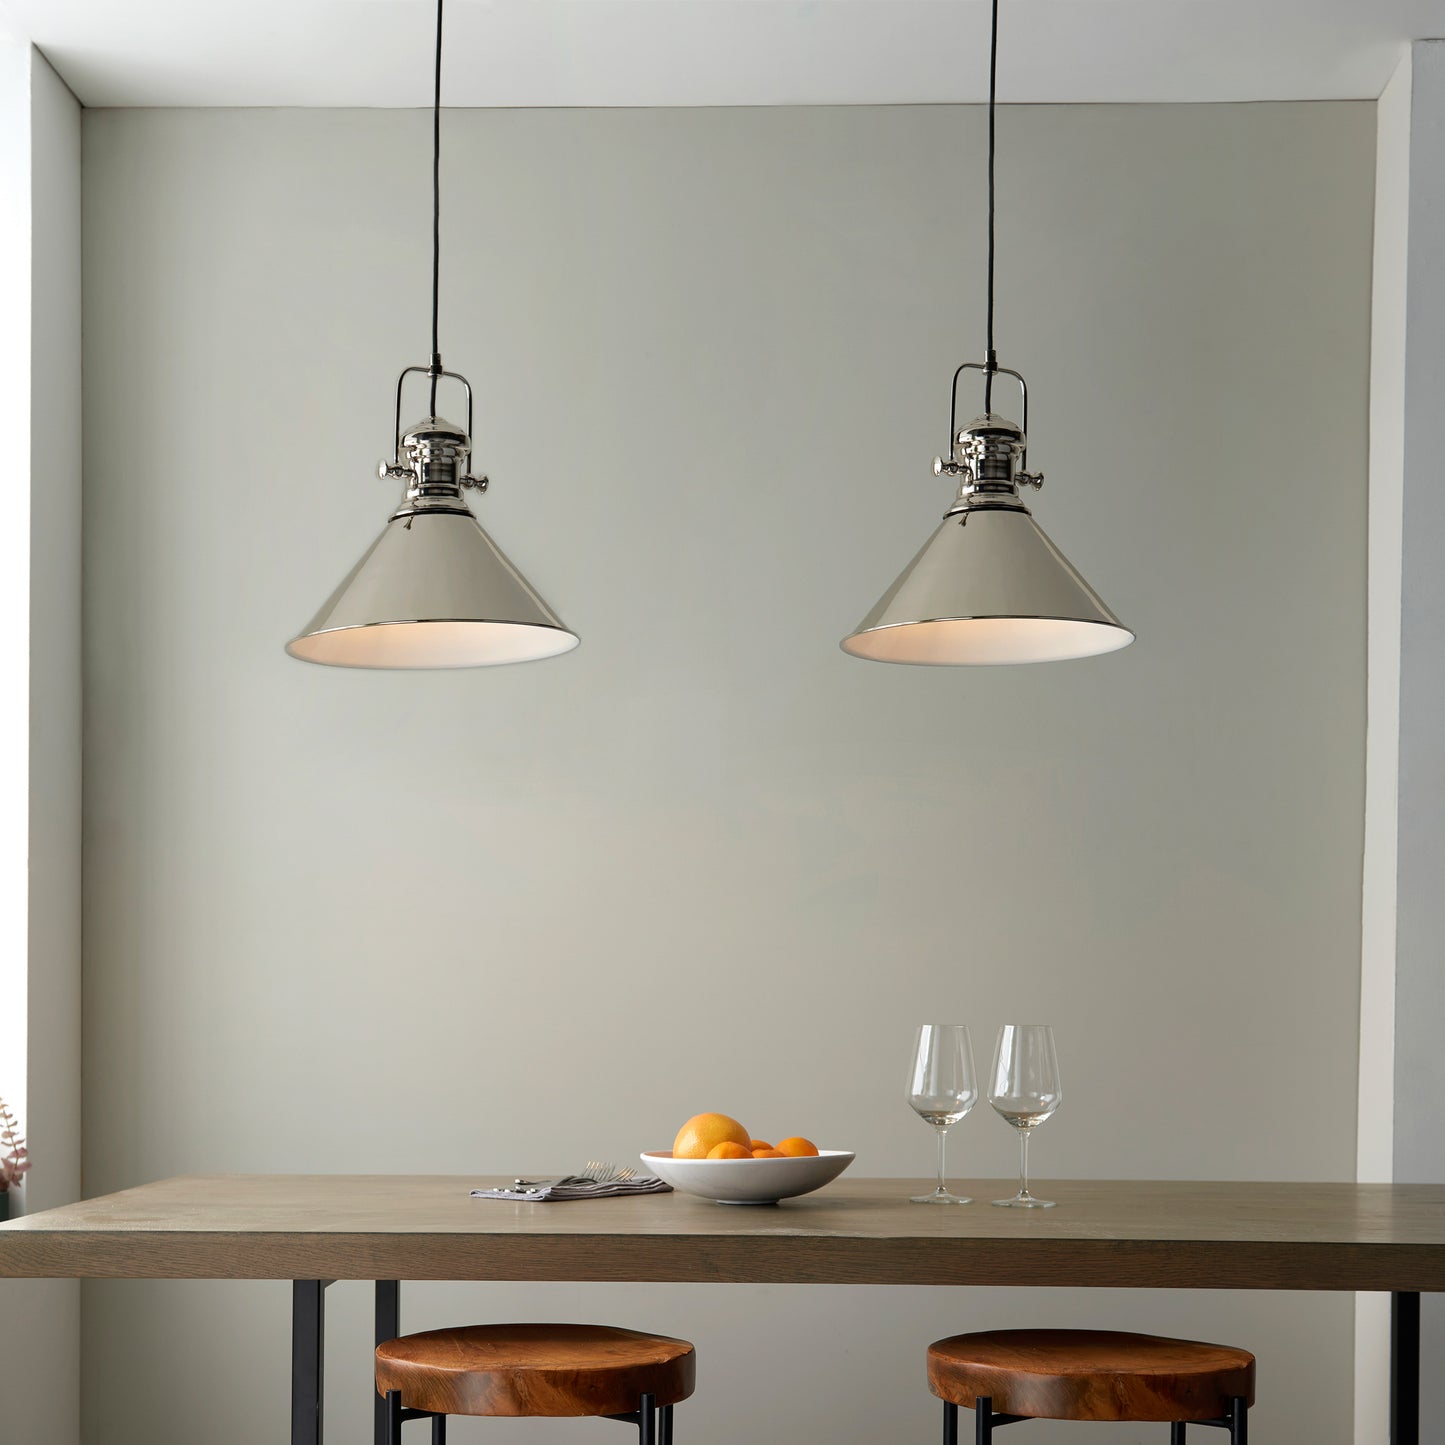 Two Brampton 1 Pendant Lights hanging over a table in a kitchen, enhancing the interior decor of the home from Kikiathome.co.uk.